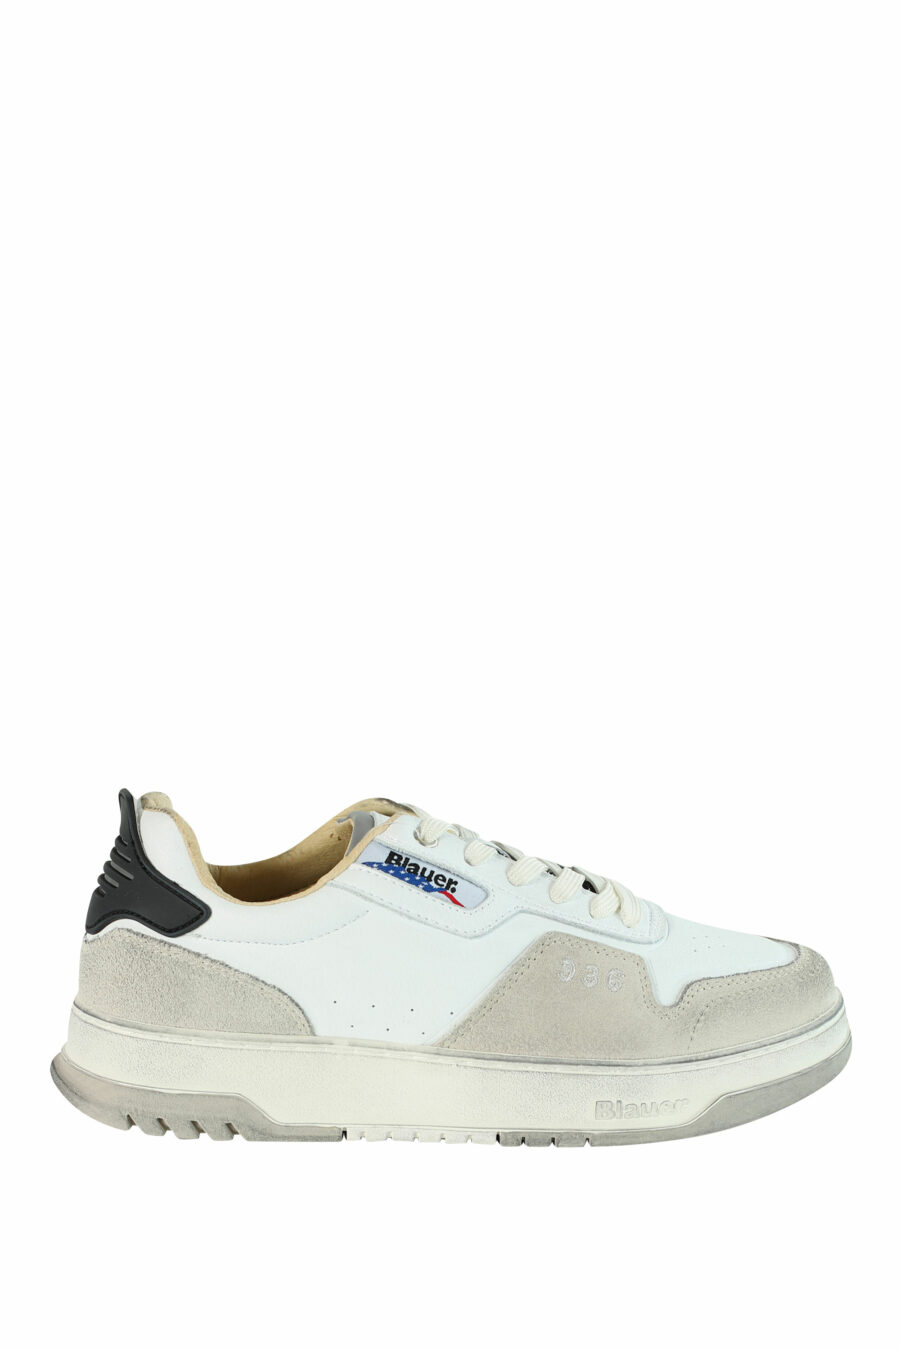 Trainers "HARPER" white mix with beige - 8058156494961